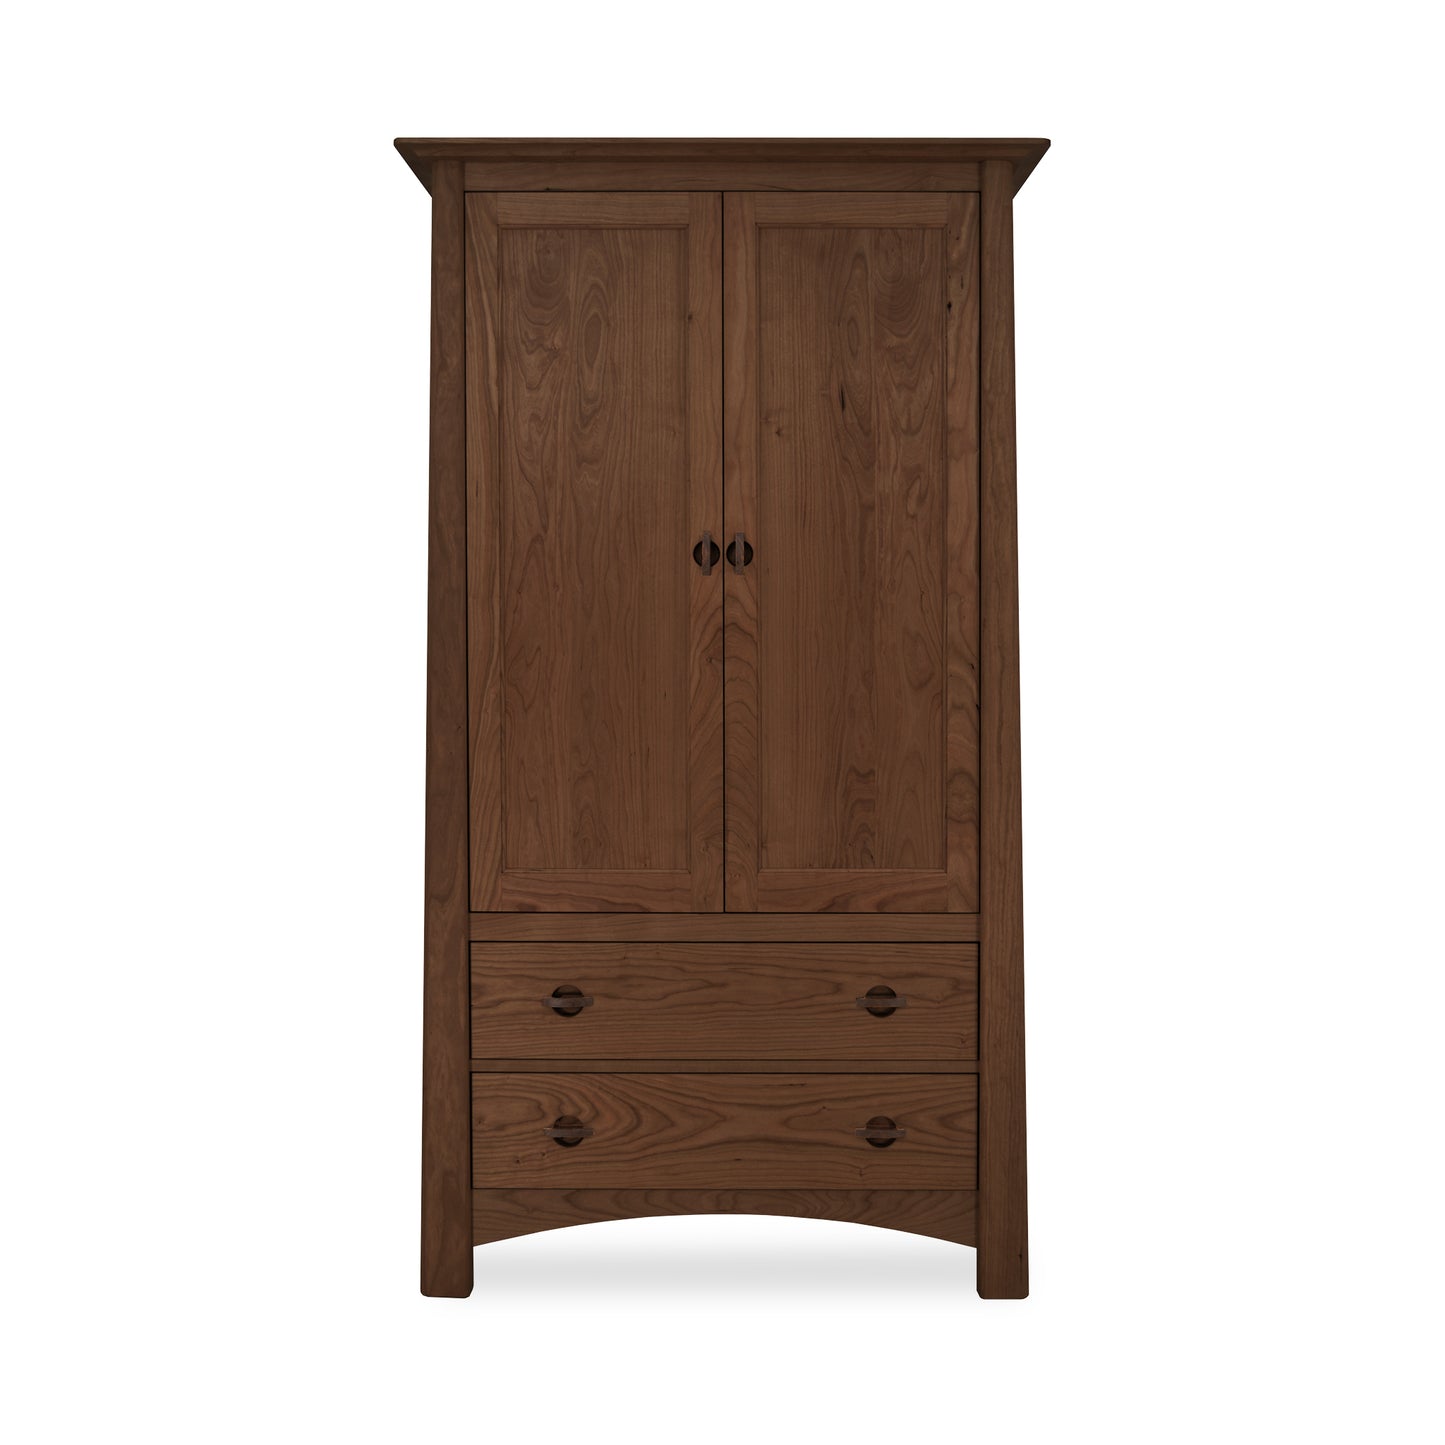 A handcrafted Maple Corner Woodworks Cherry Moon armoire with two drawers.